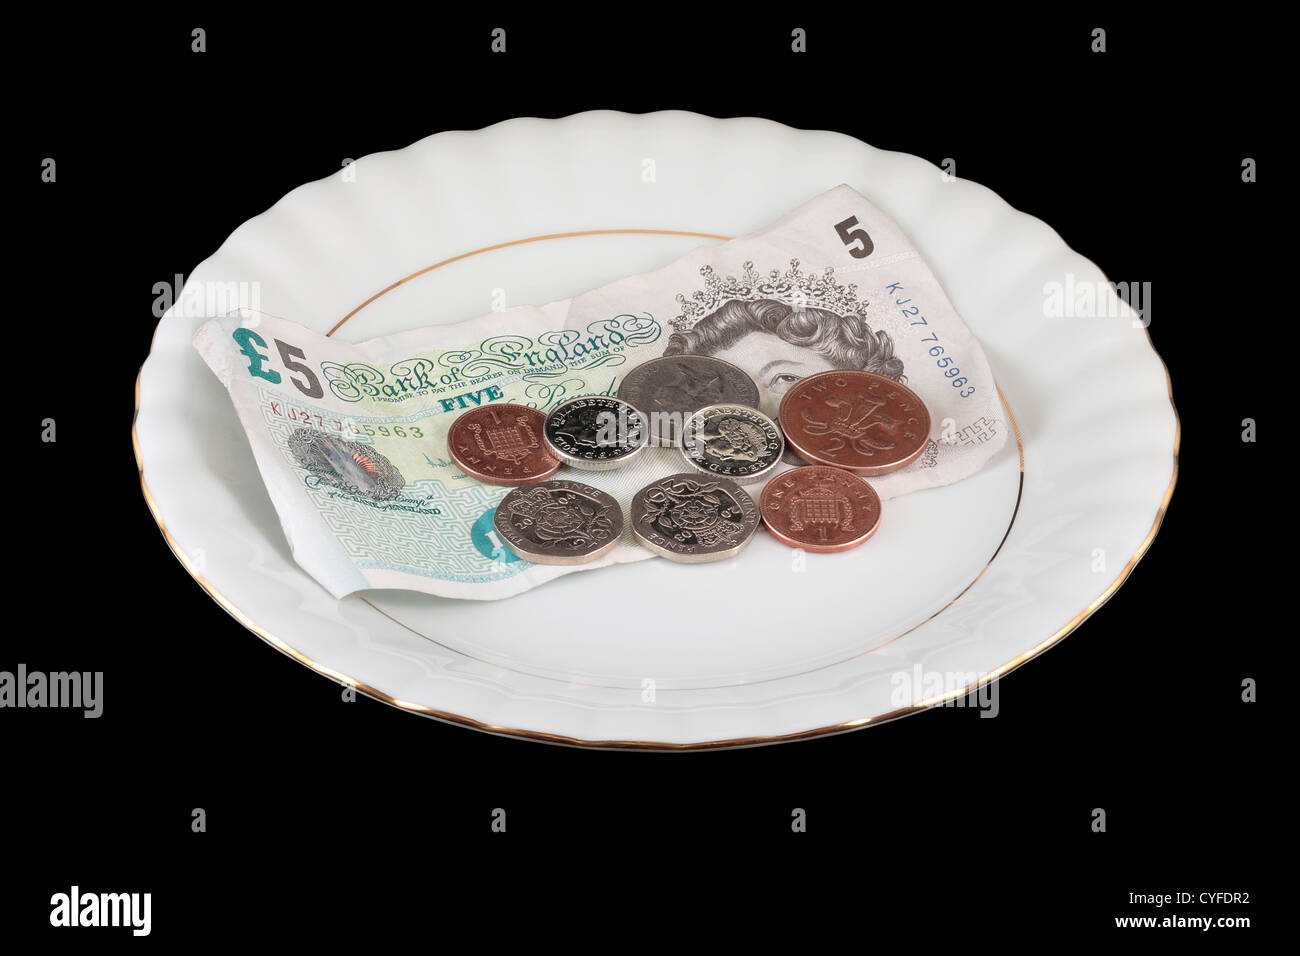 English Money on White Gold Rimmed Plate isolated on black background Stock Photo